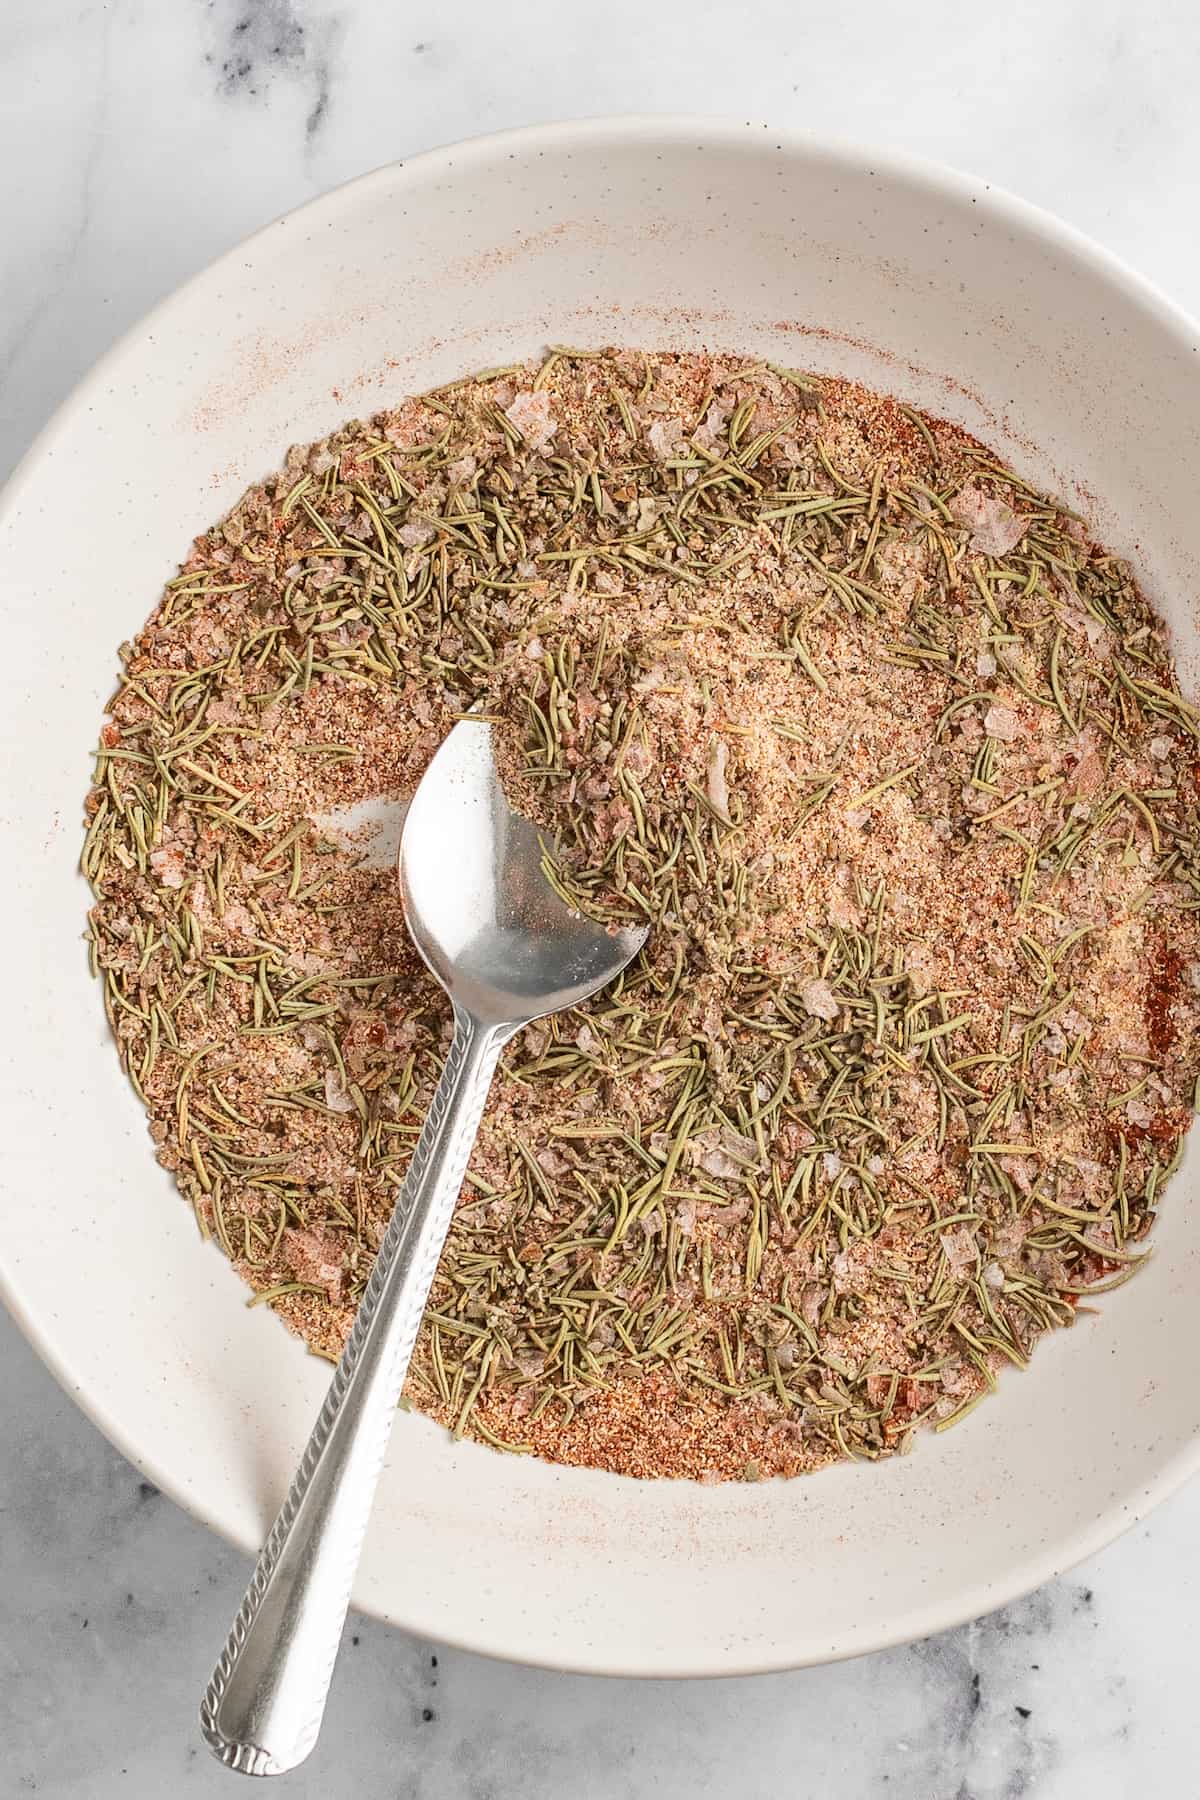 making a dry spice mixture in a small bowl